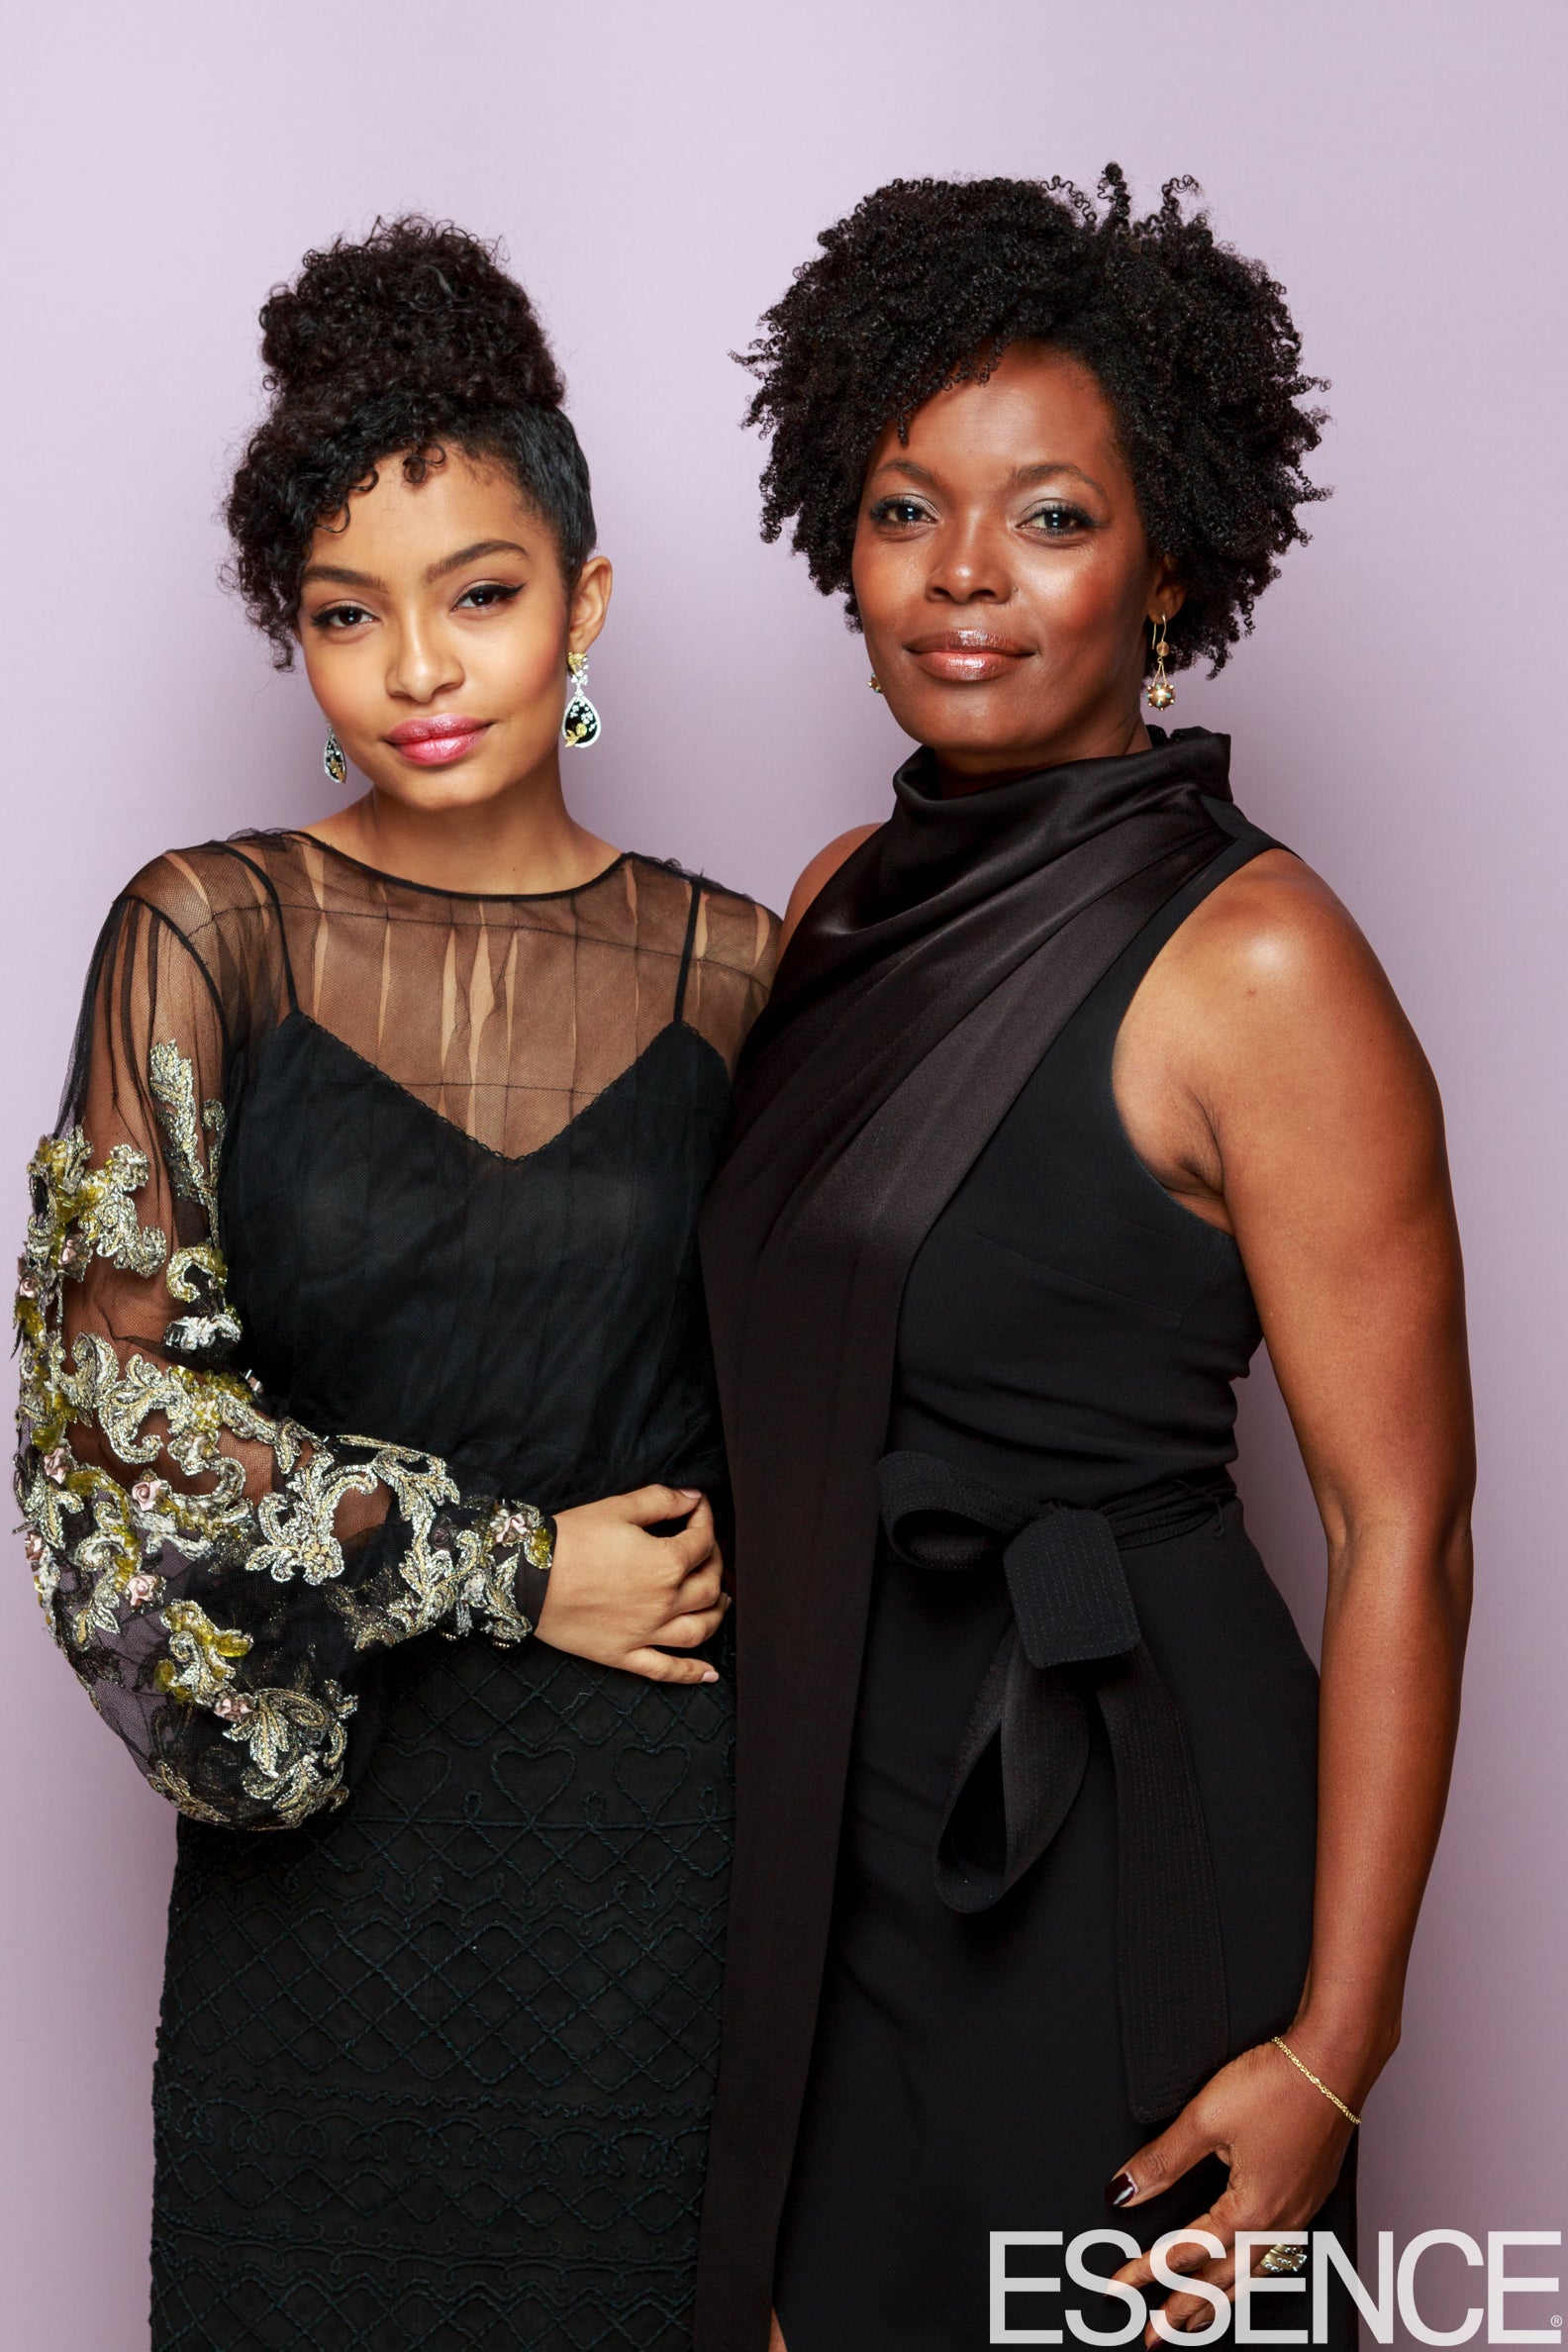 EXCLUSIVE: Celebrities Slayed In The ESSENCE 2017 Black Women In Hollywood Awards' Photo Booth
